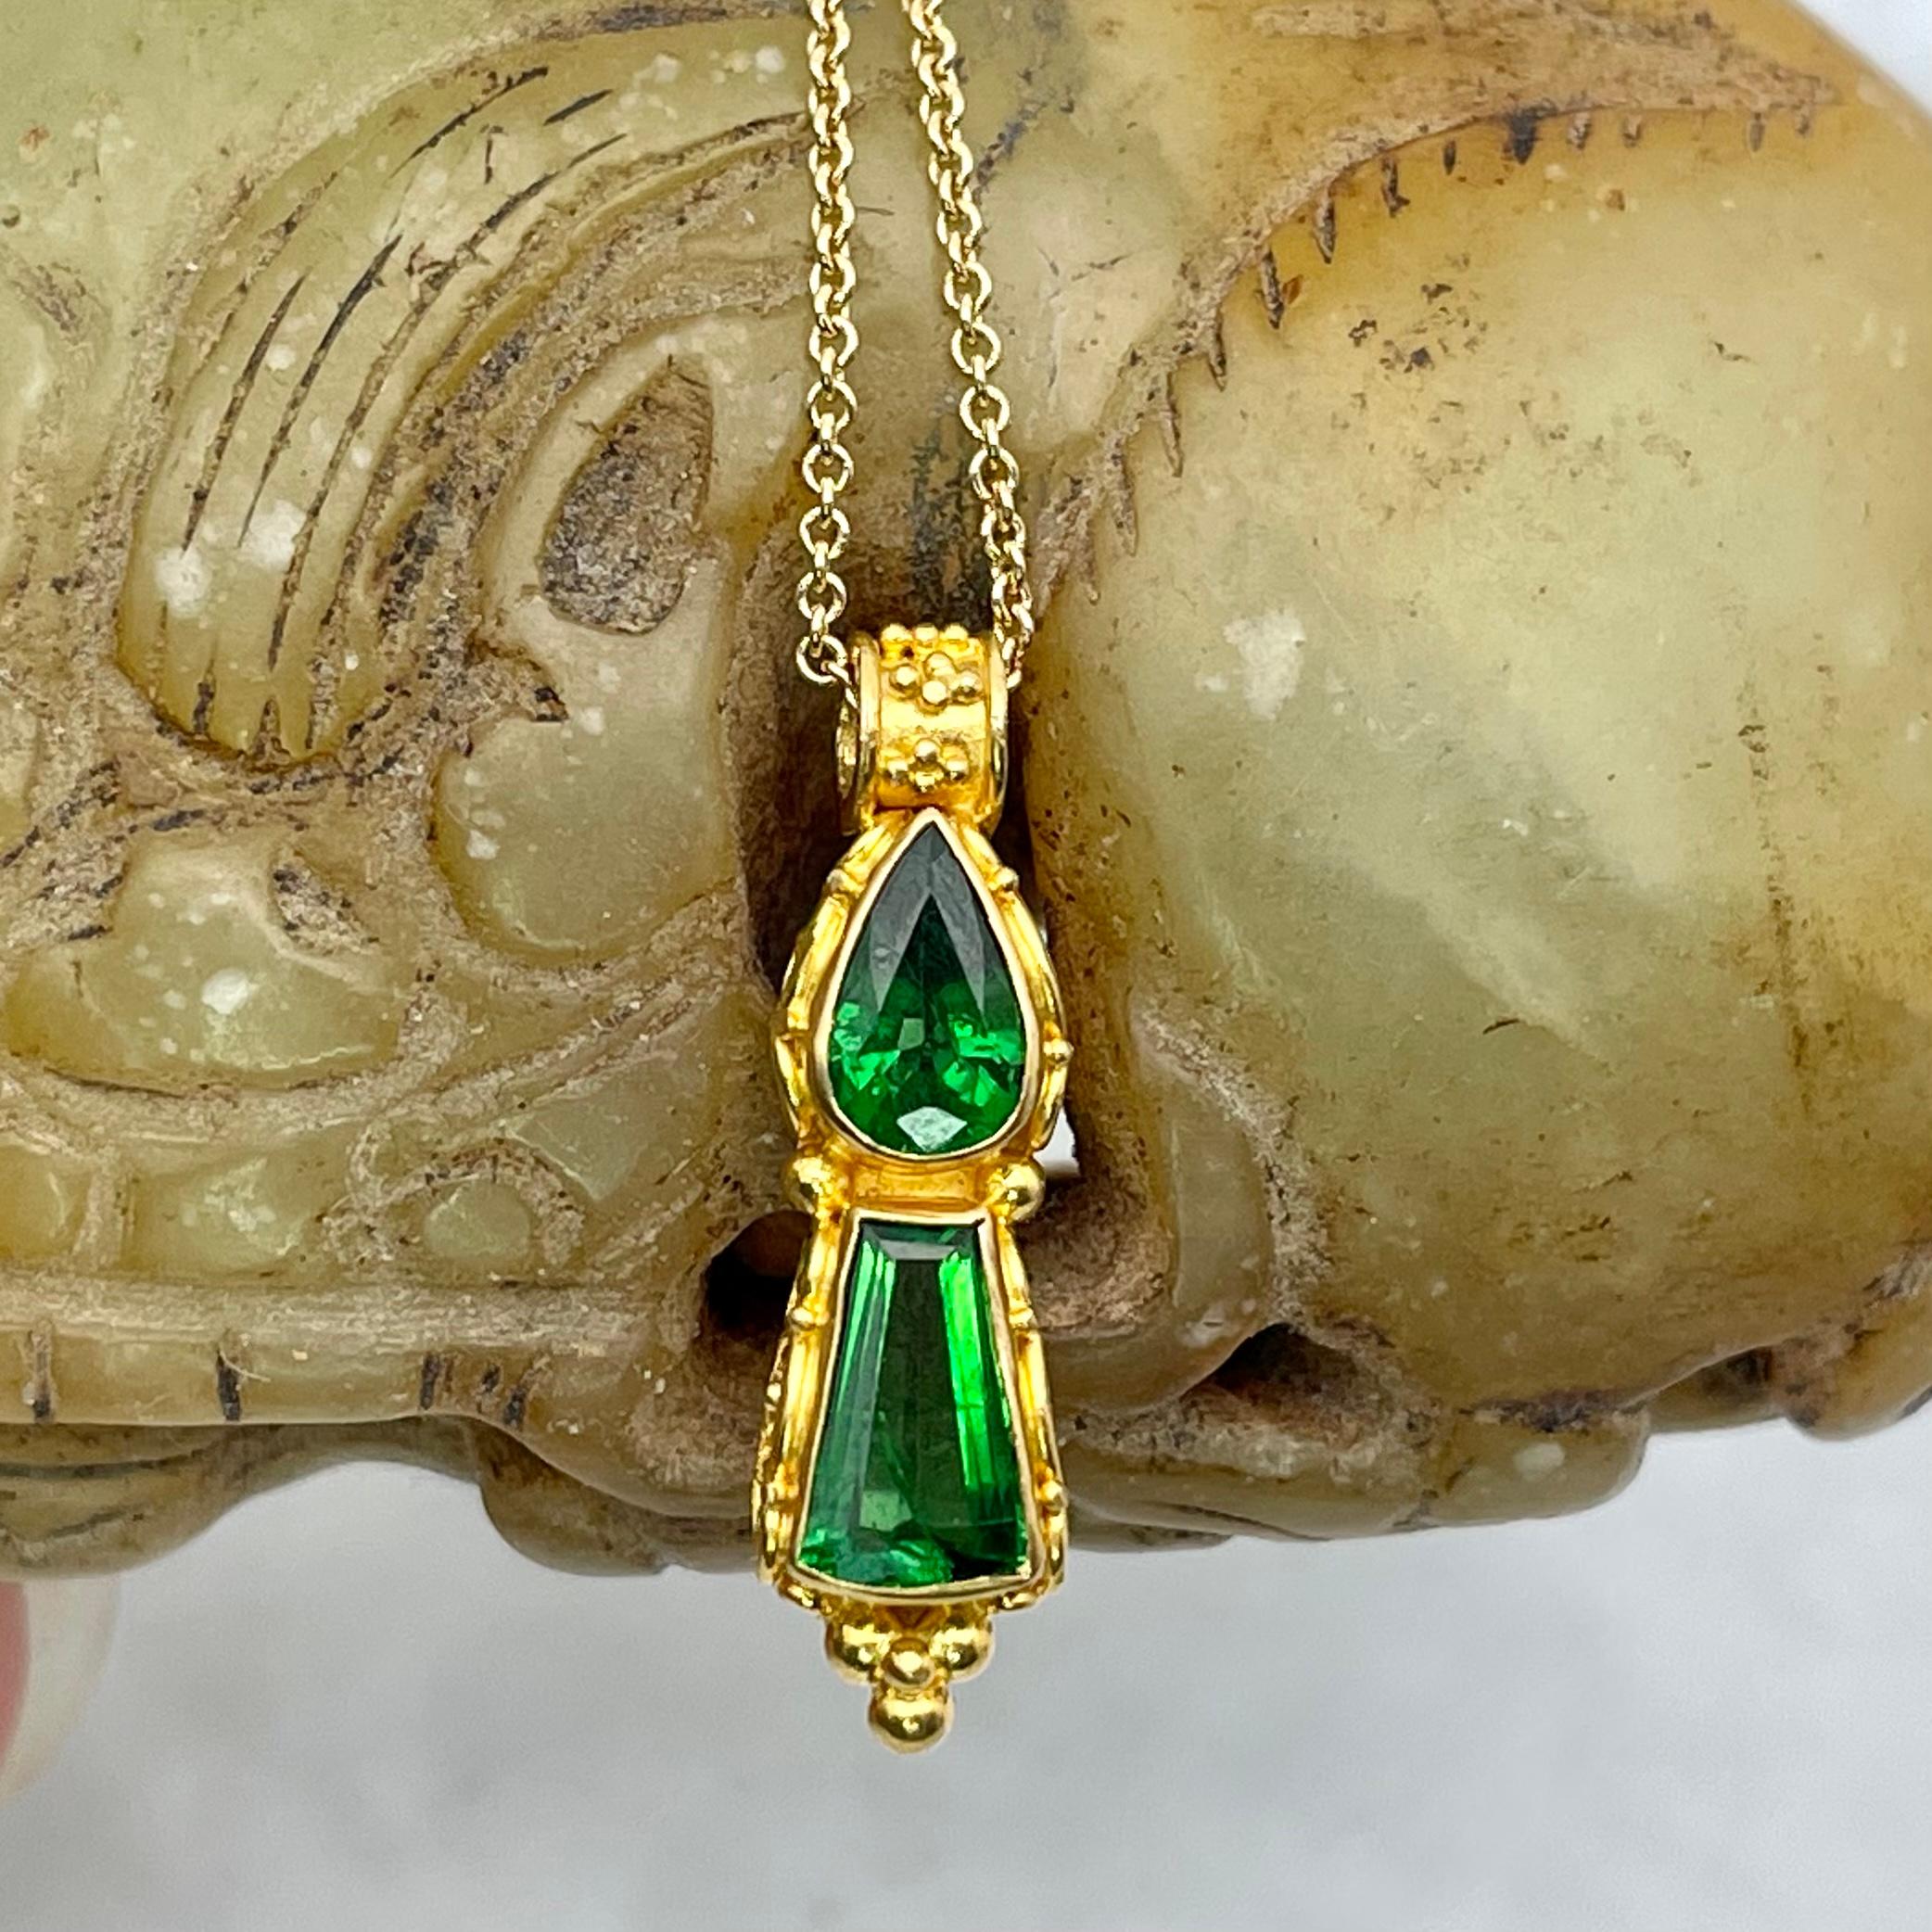 Brilliant green 4 x 6 mm pear shaped and 5 x 7 mm trapezoidal faceted tsavorite garnets are surrounded with intricate 22K wire and scrollwork accents in this example of classic handmade artisanship. Note that the bail size is fairly narrow, about 3